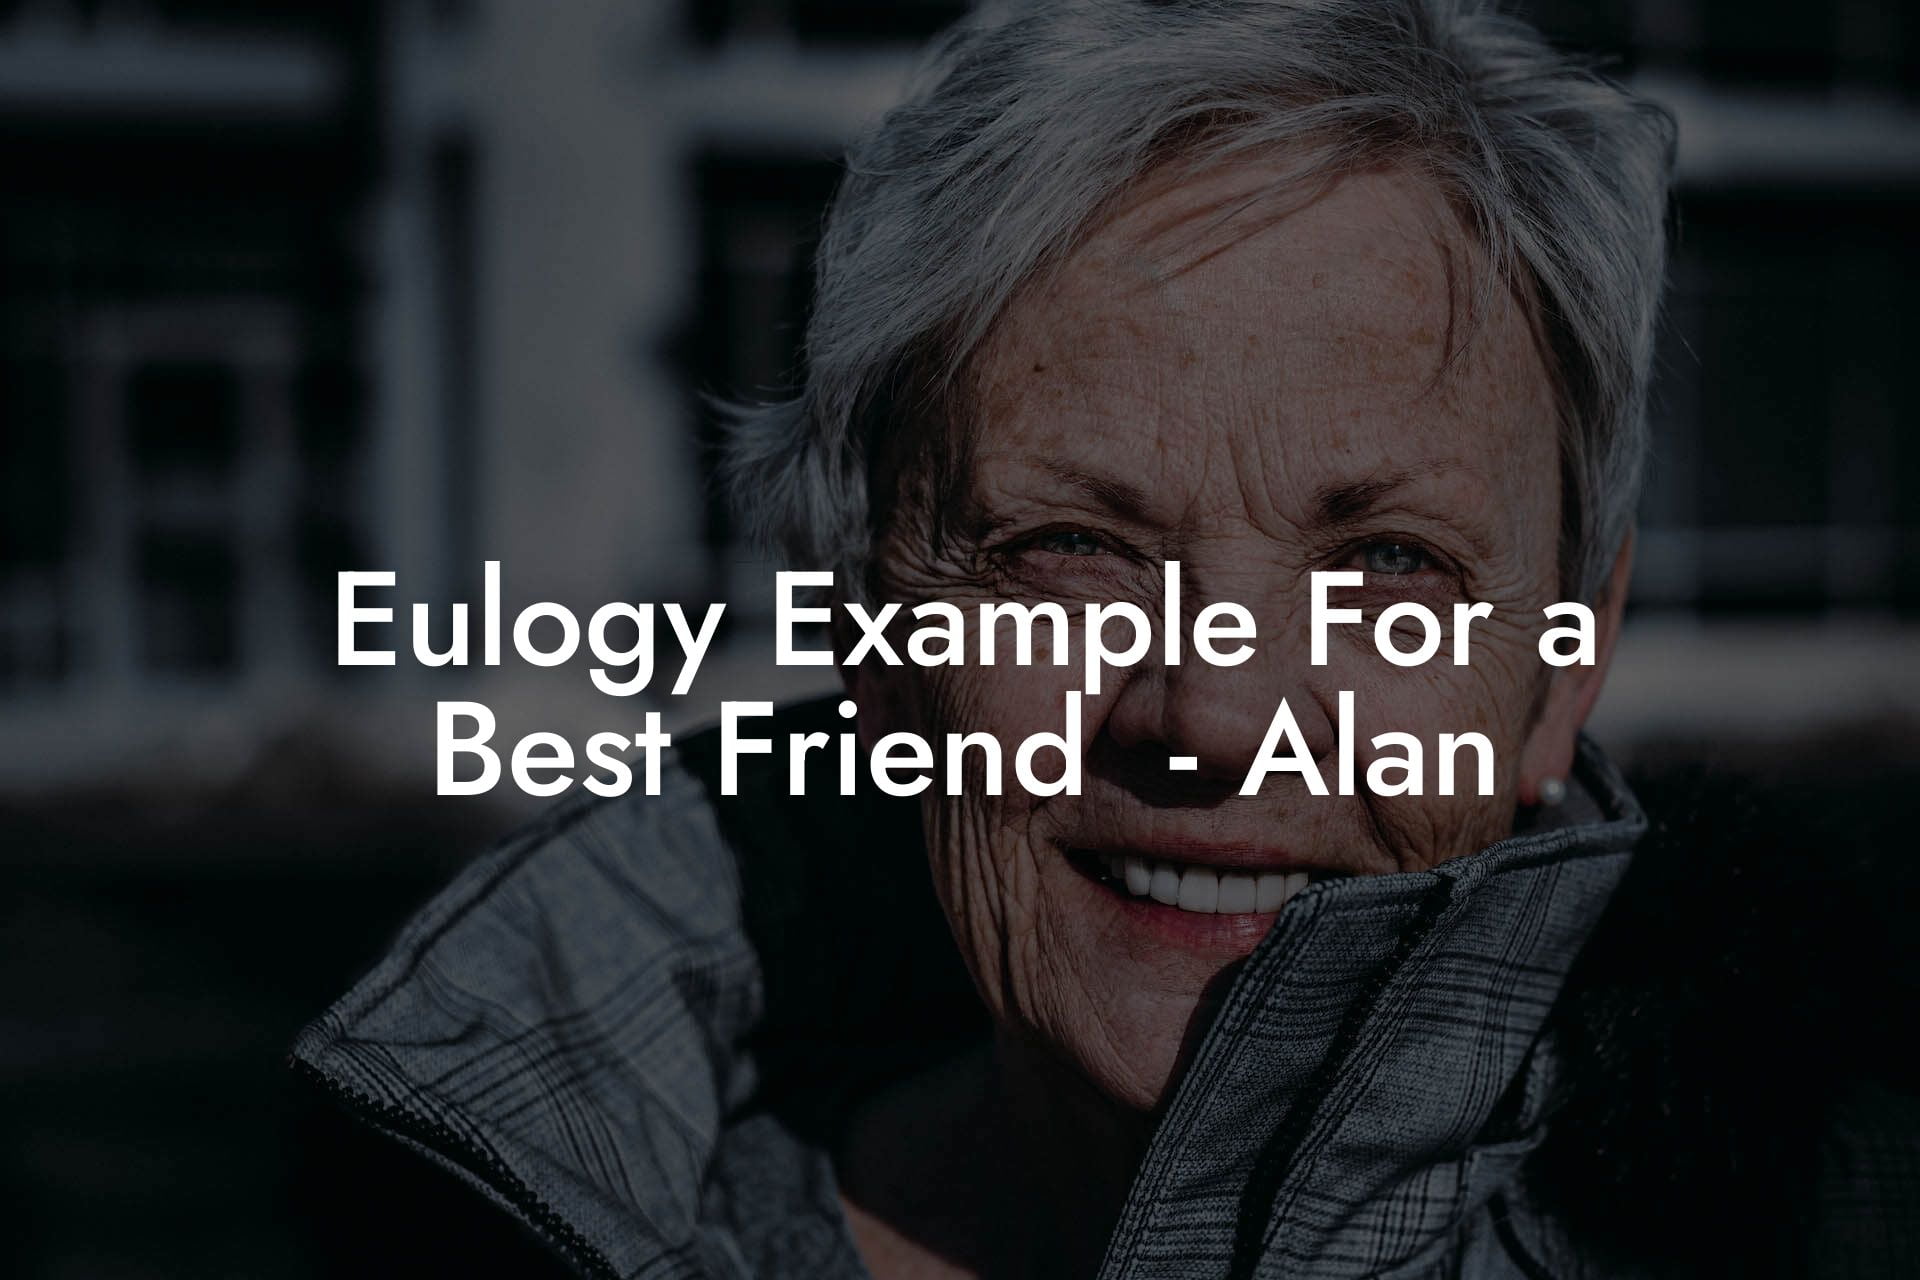 Eulogy Example For a Best Friend    Alan